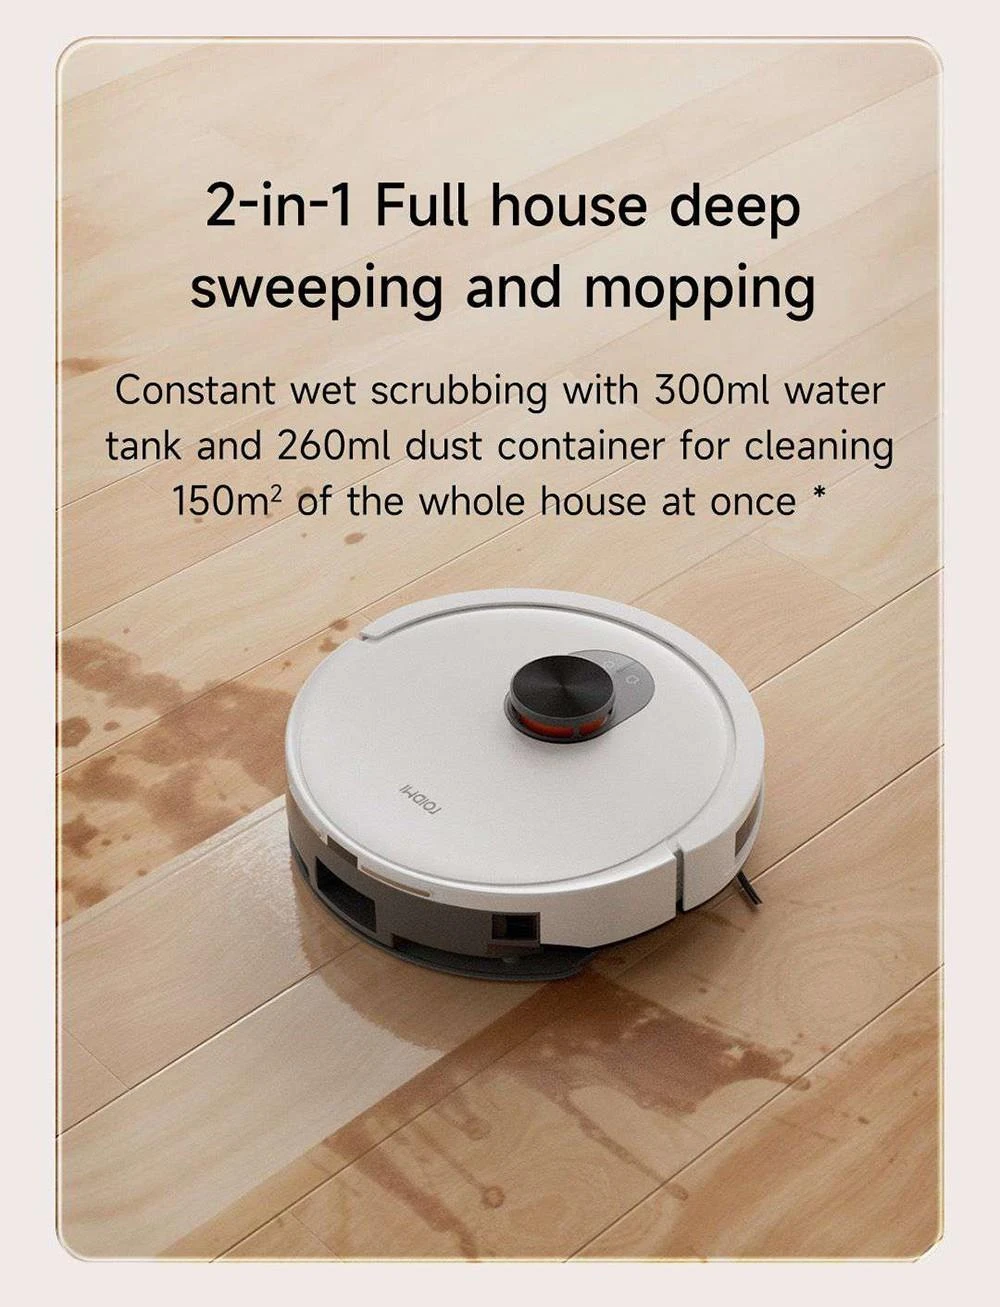 Xiaomi ROIDMI EVE CC Robot Vacuum Cleaner Automatic Dust Collection 2-in-1 Vacuuming Mopping 4000Pa Powerful Suction LDS Laser Navigation 3200mAh Battery 180Mins Runtime 290ML Water Tank 260ML Dust Box APP Control - White